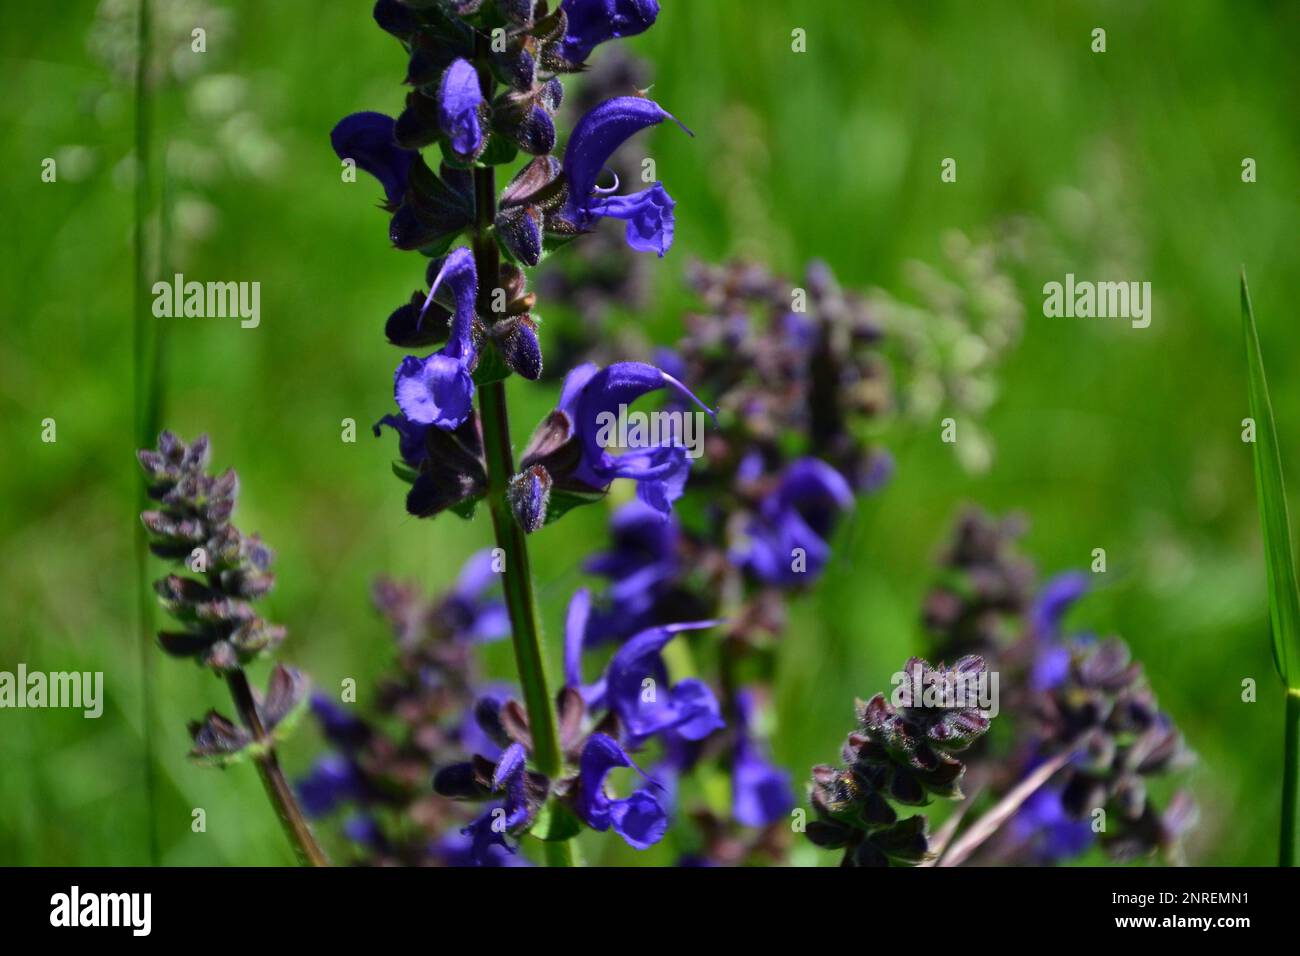 Close up of a butterfly lavender (Lavandula stoechas pedunculata). The flower is dark blue. It grows in nature, at the edge of a path. Stock Photo